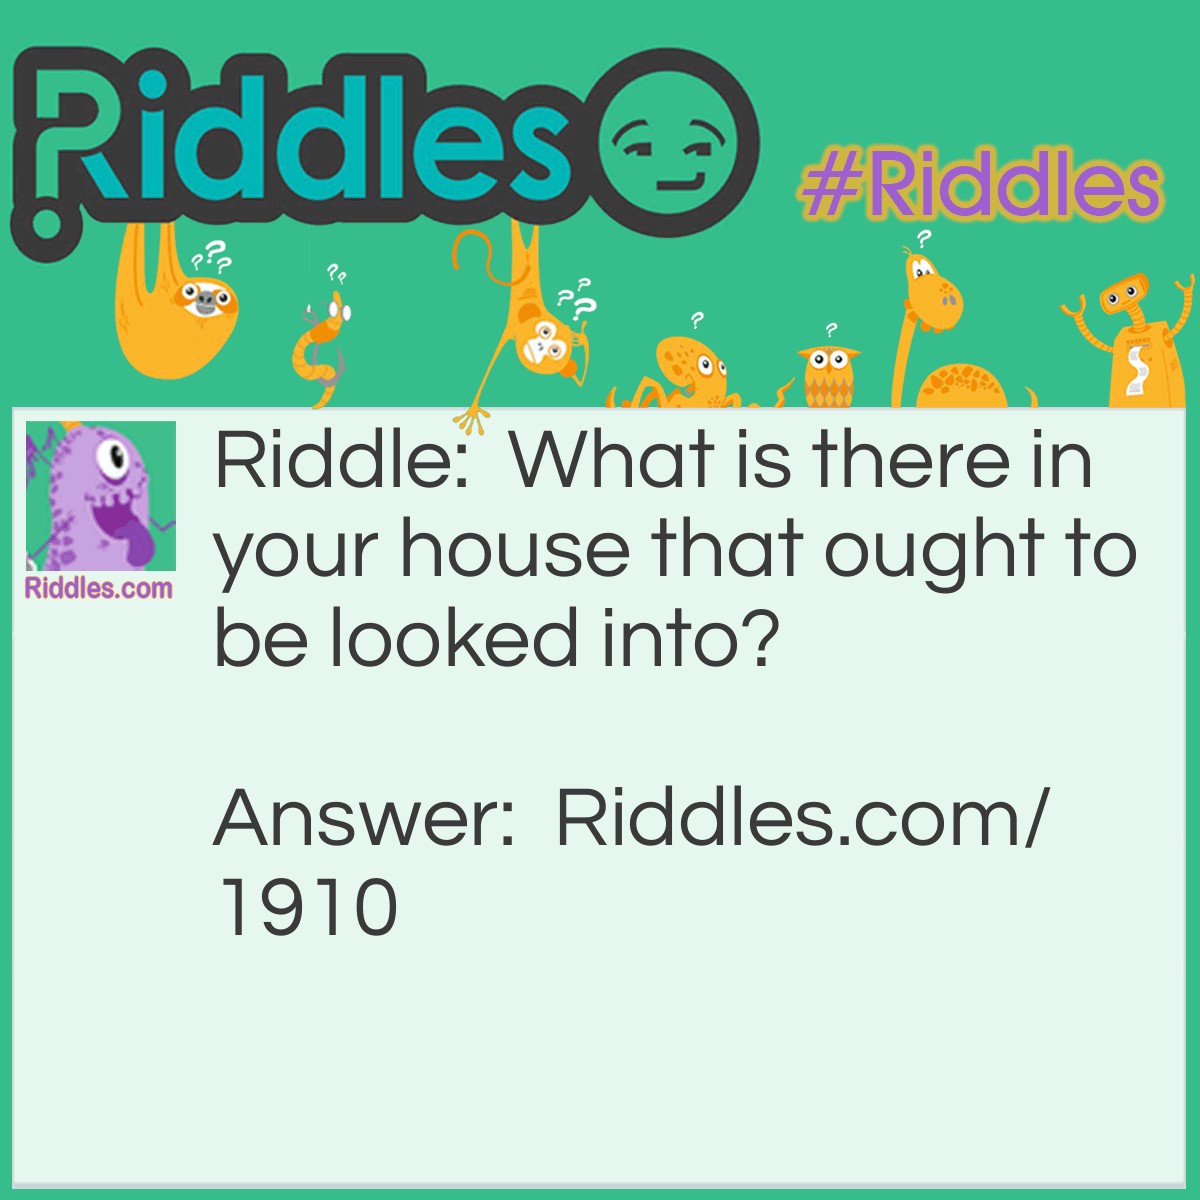 Riddle: What is there in your house that ought to be looked into? Answer: A mirror.